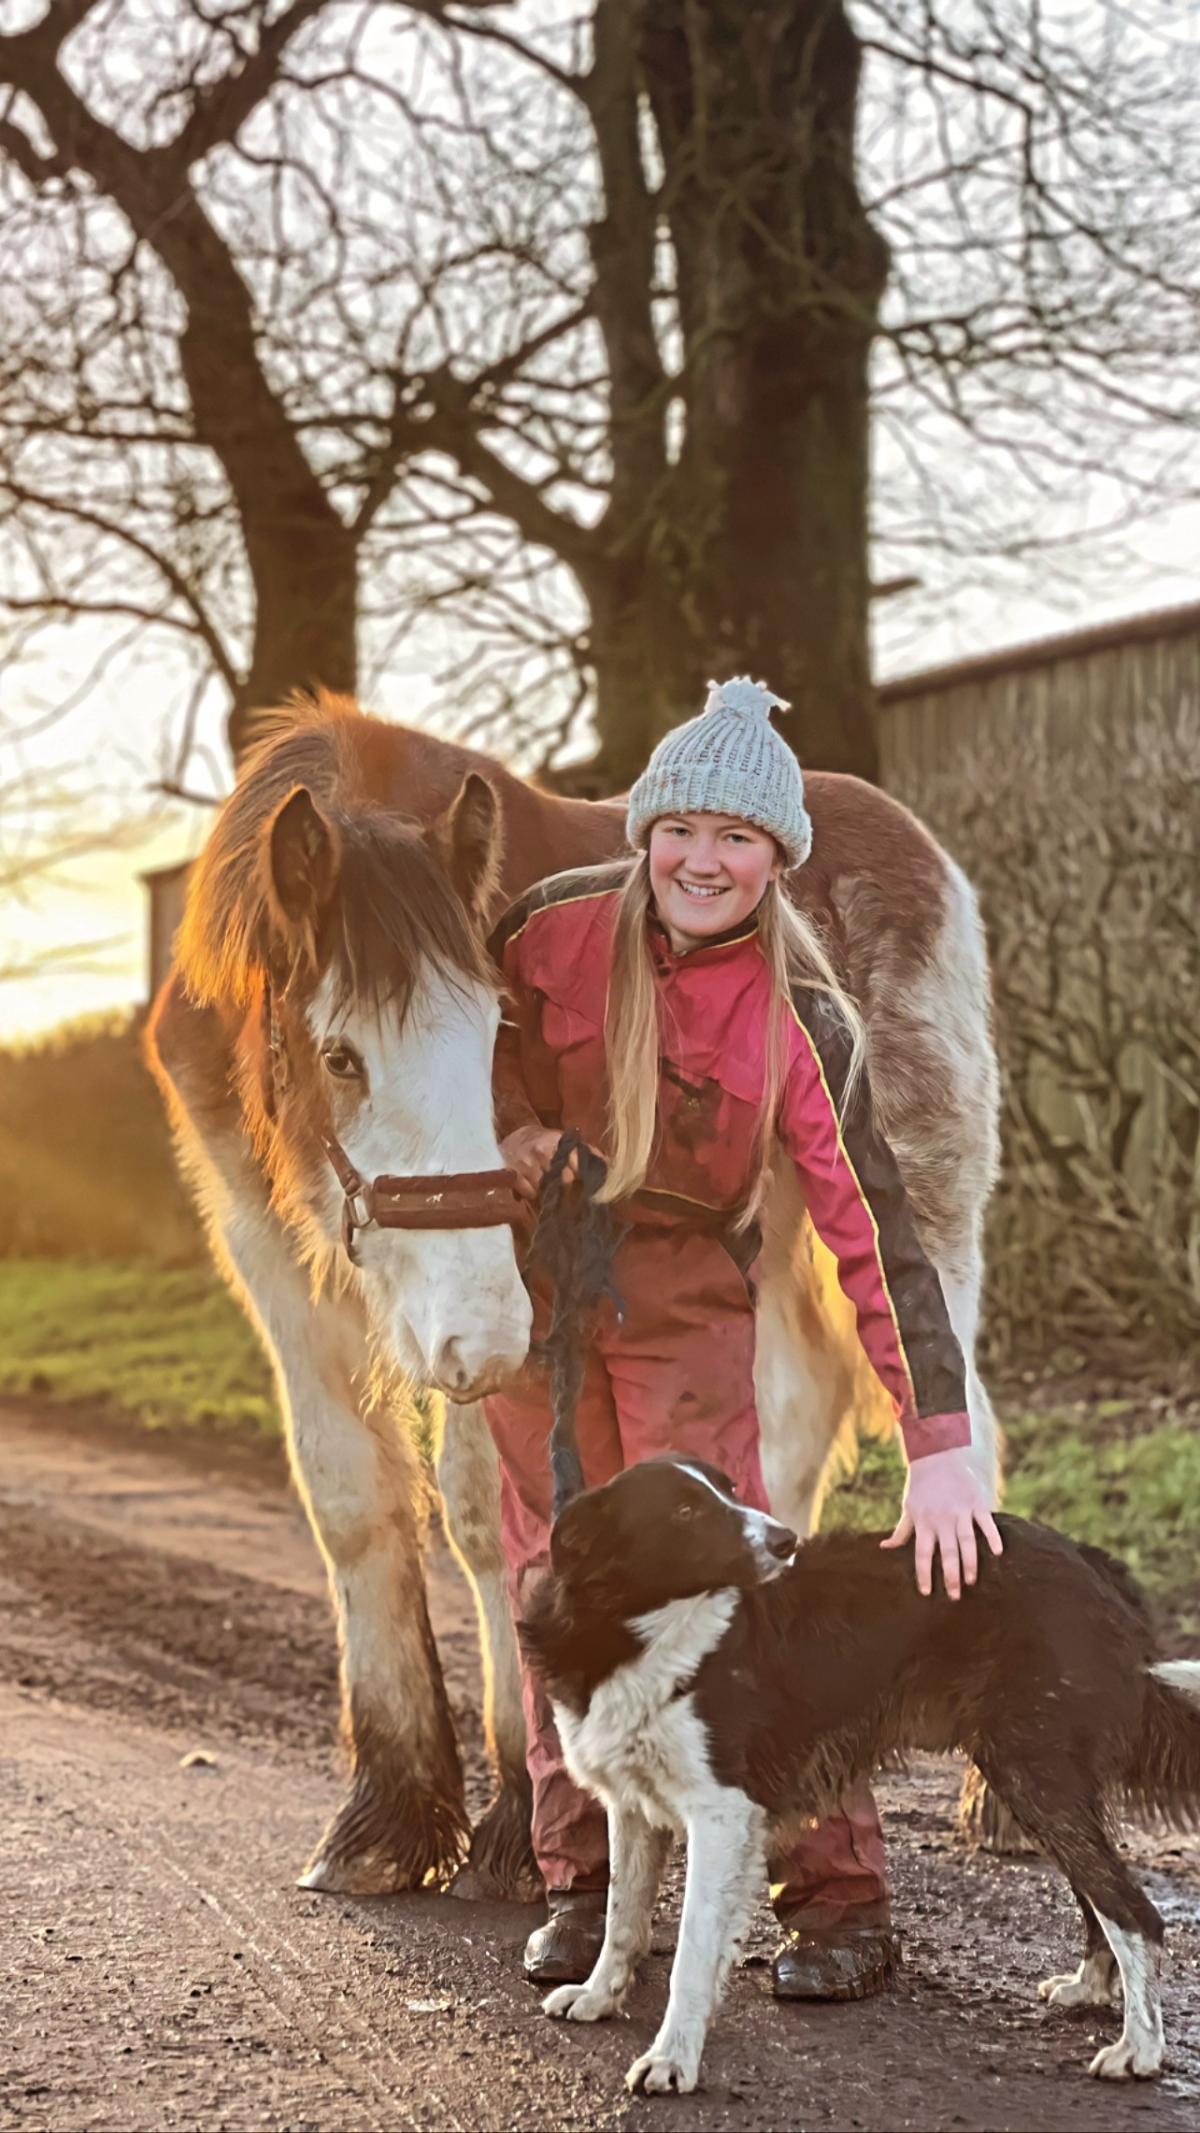 Islay Henderson (Auchenrivouch Farm) - enjoying a winters evening stroll with her Clydesdale foal, Wullie Young, and her trusty collie dog, Rook.